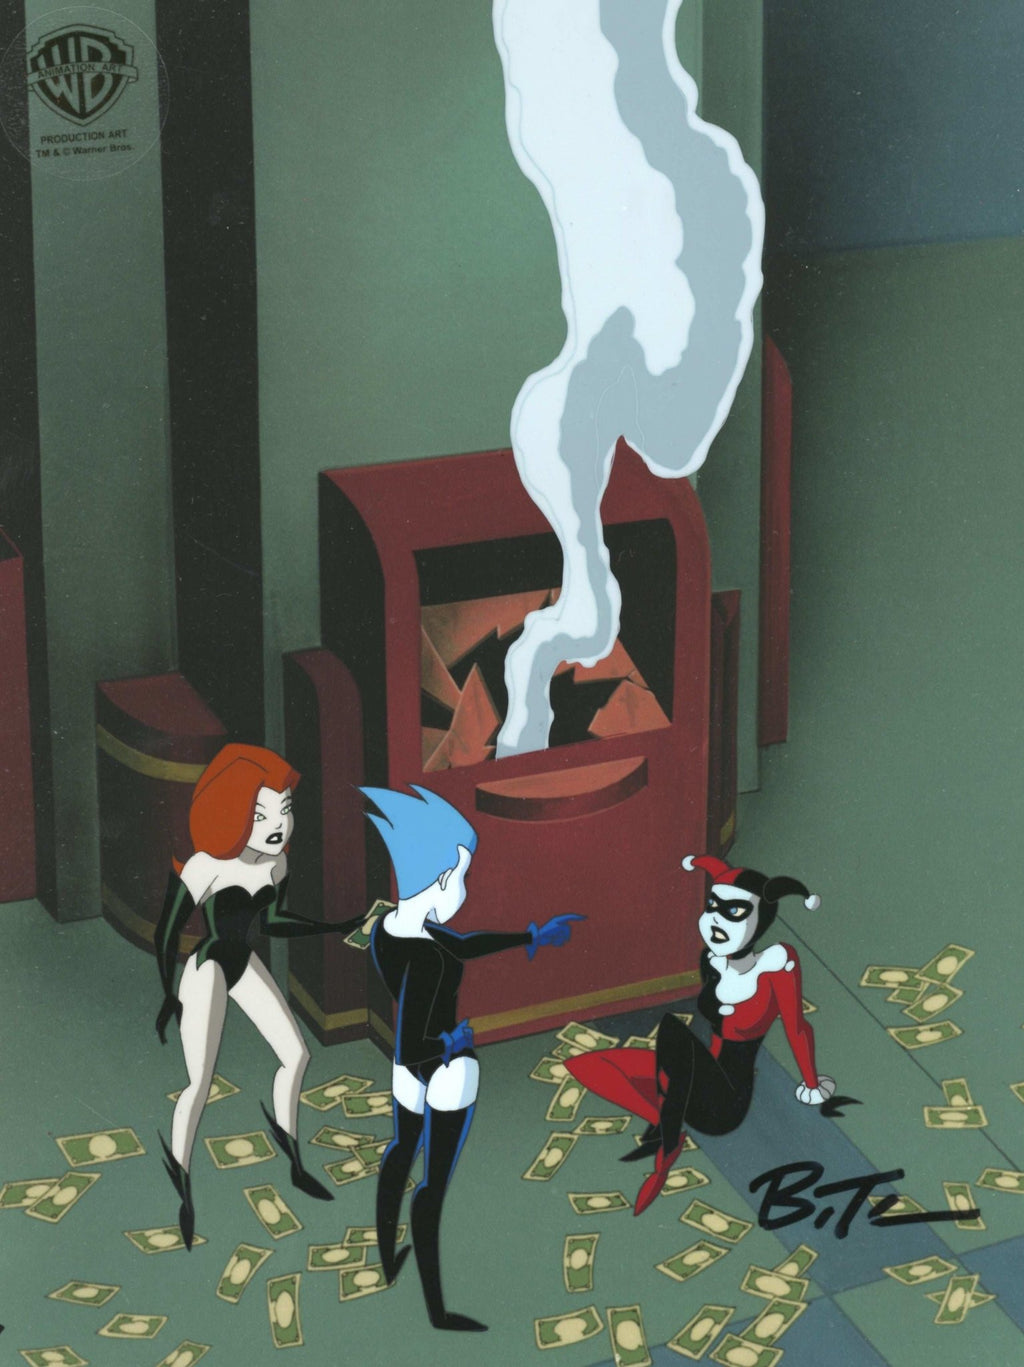 The New Batman Adventures Original Production Cel with Matching Drawing Signed by Bruce Timm: Harley Quinn, Livewire, and Poison Ivy - Choice Fine Art